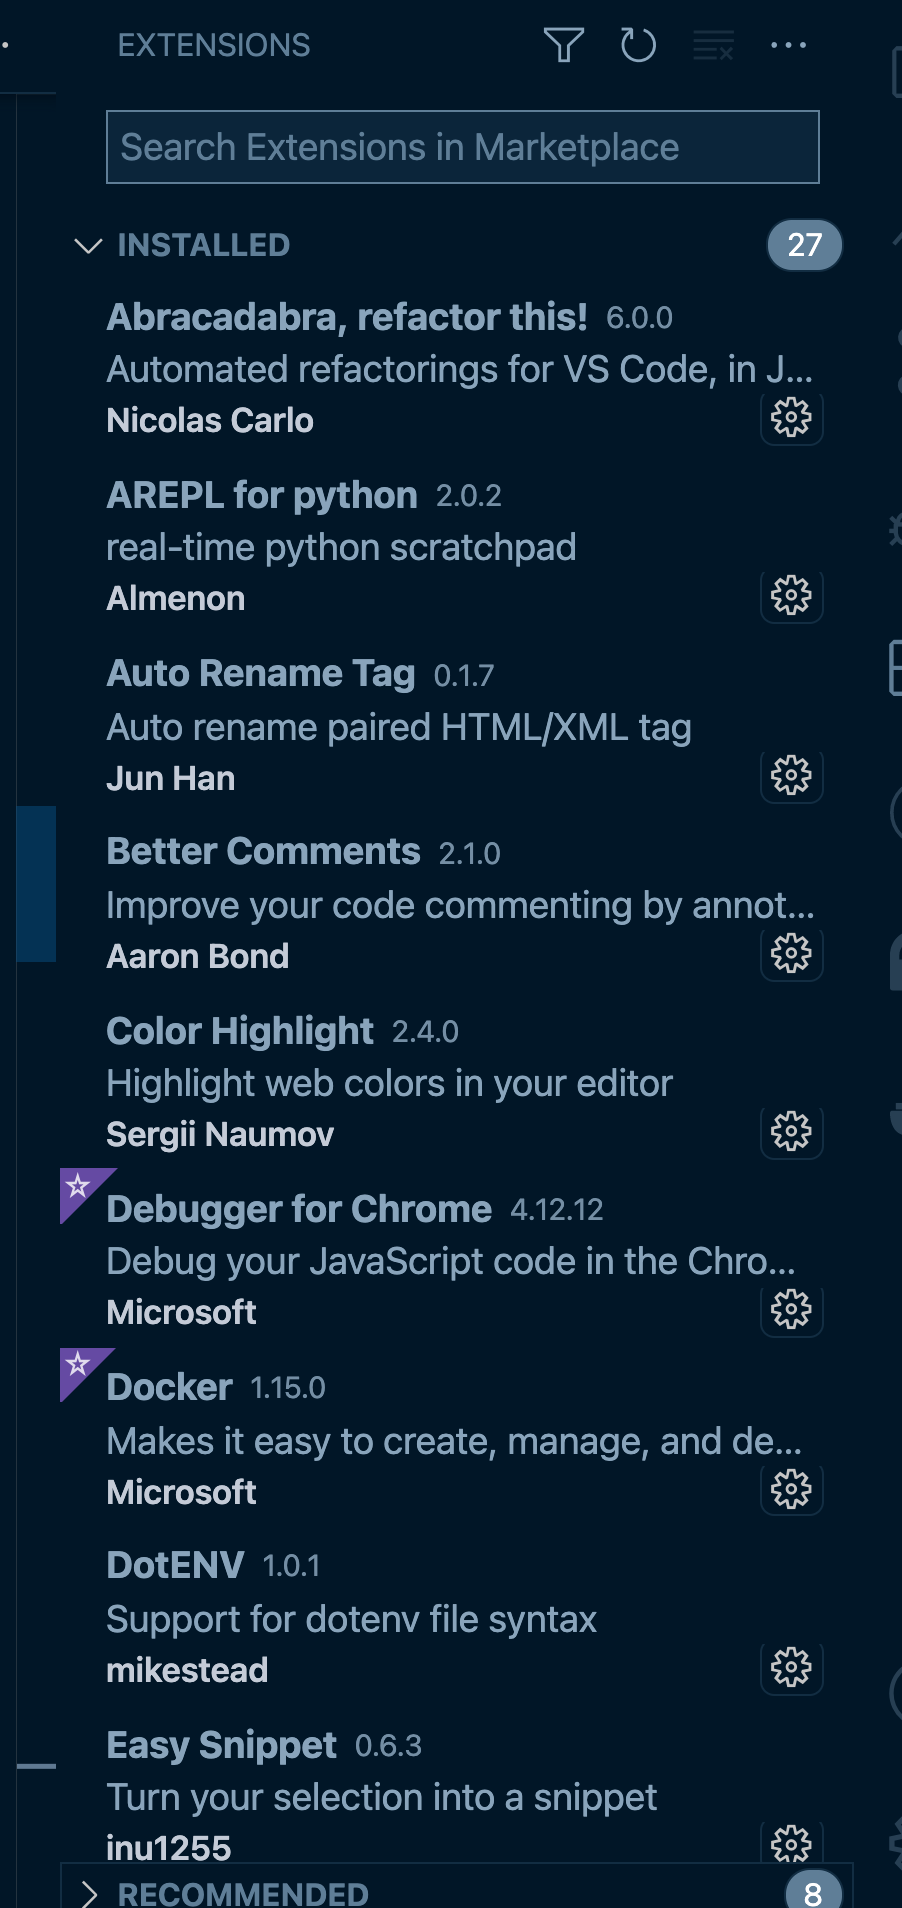 VSCode extensions